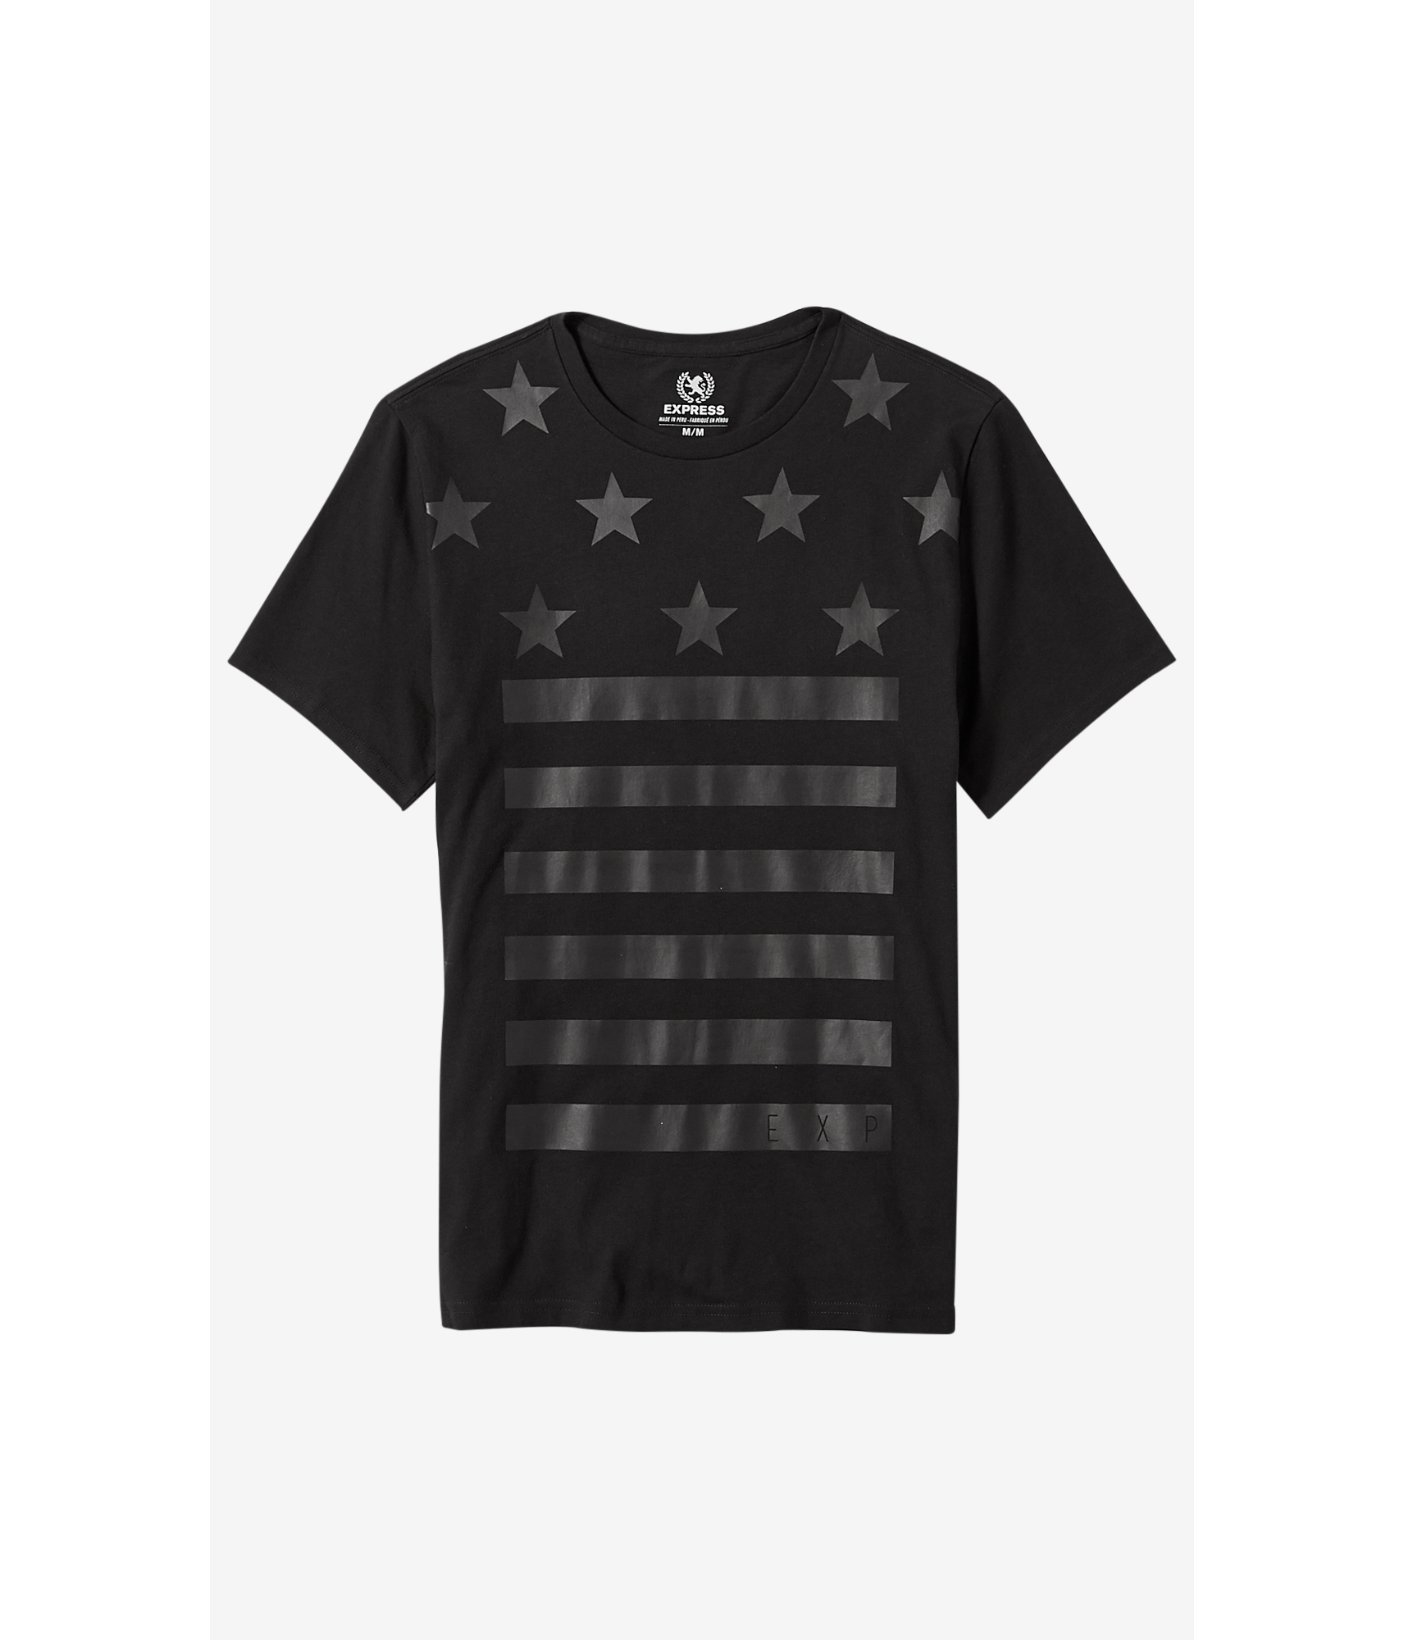 express-pitch-black-black-stars-and-stripes-graphic-t-shirt-product-0-122066922-normal